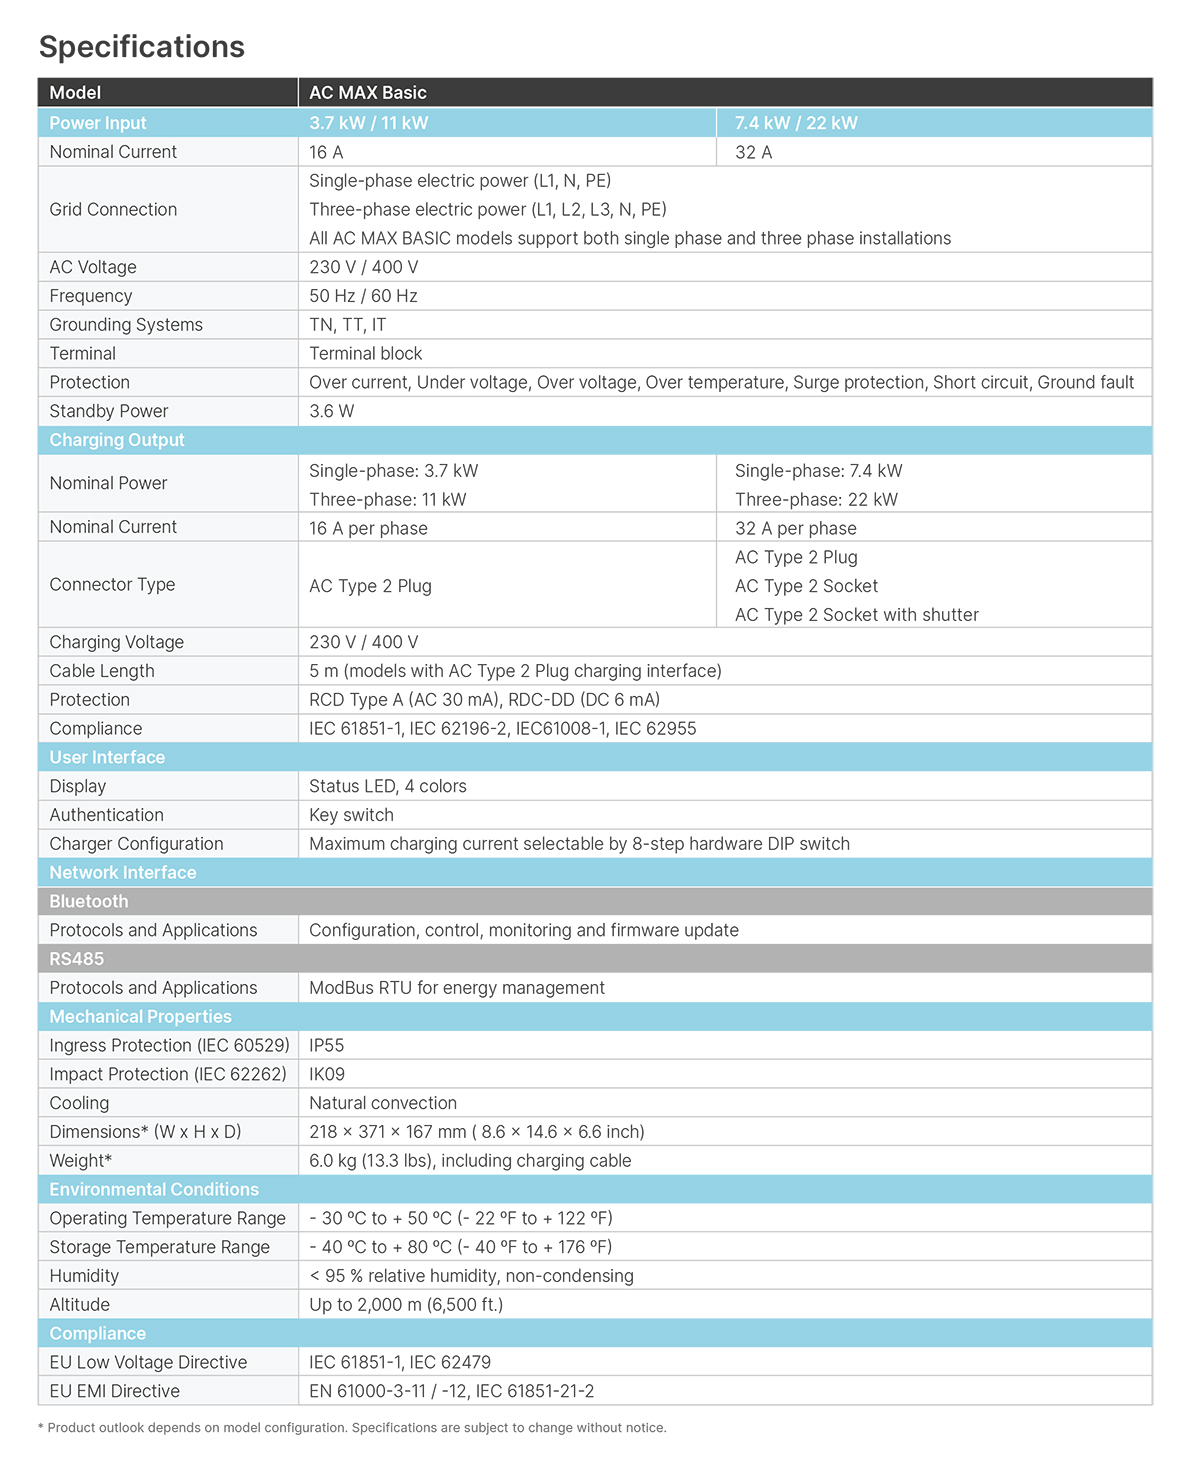 AC MaX Specification